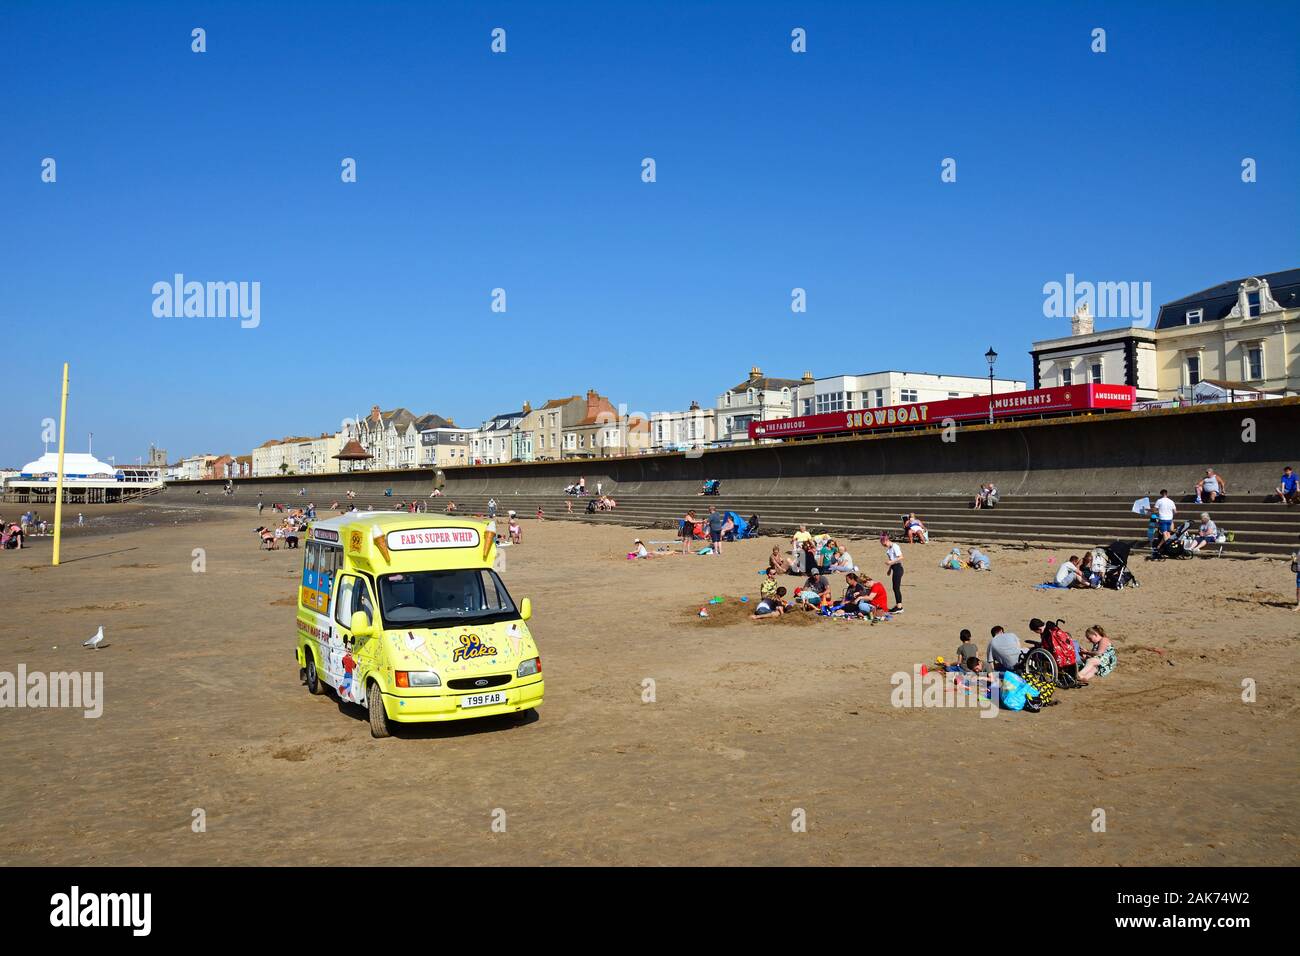 Tourists relaxing on the beach with an ice cream van in the foreground, Burnham-on-Sea, England, UK. Stock Photo